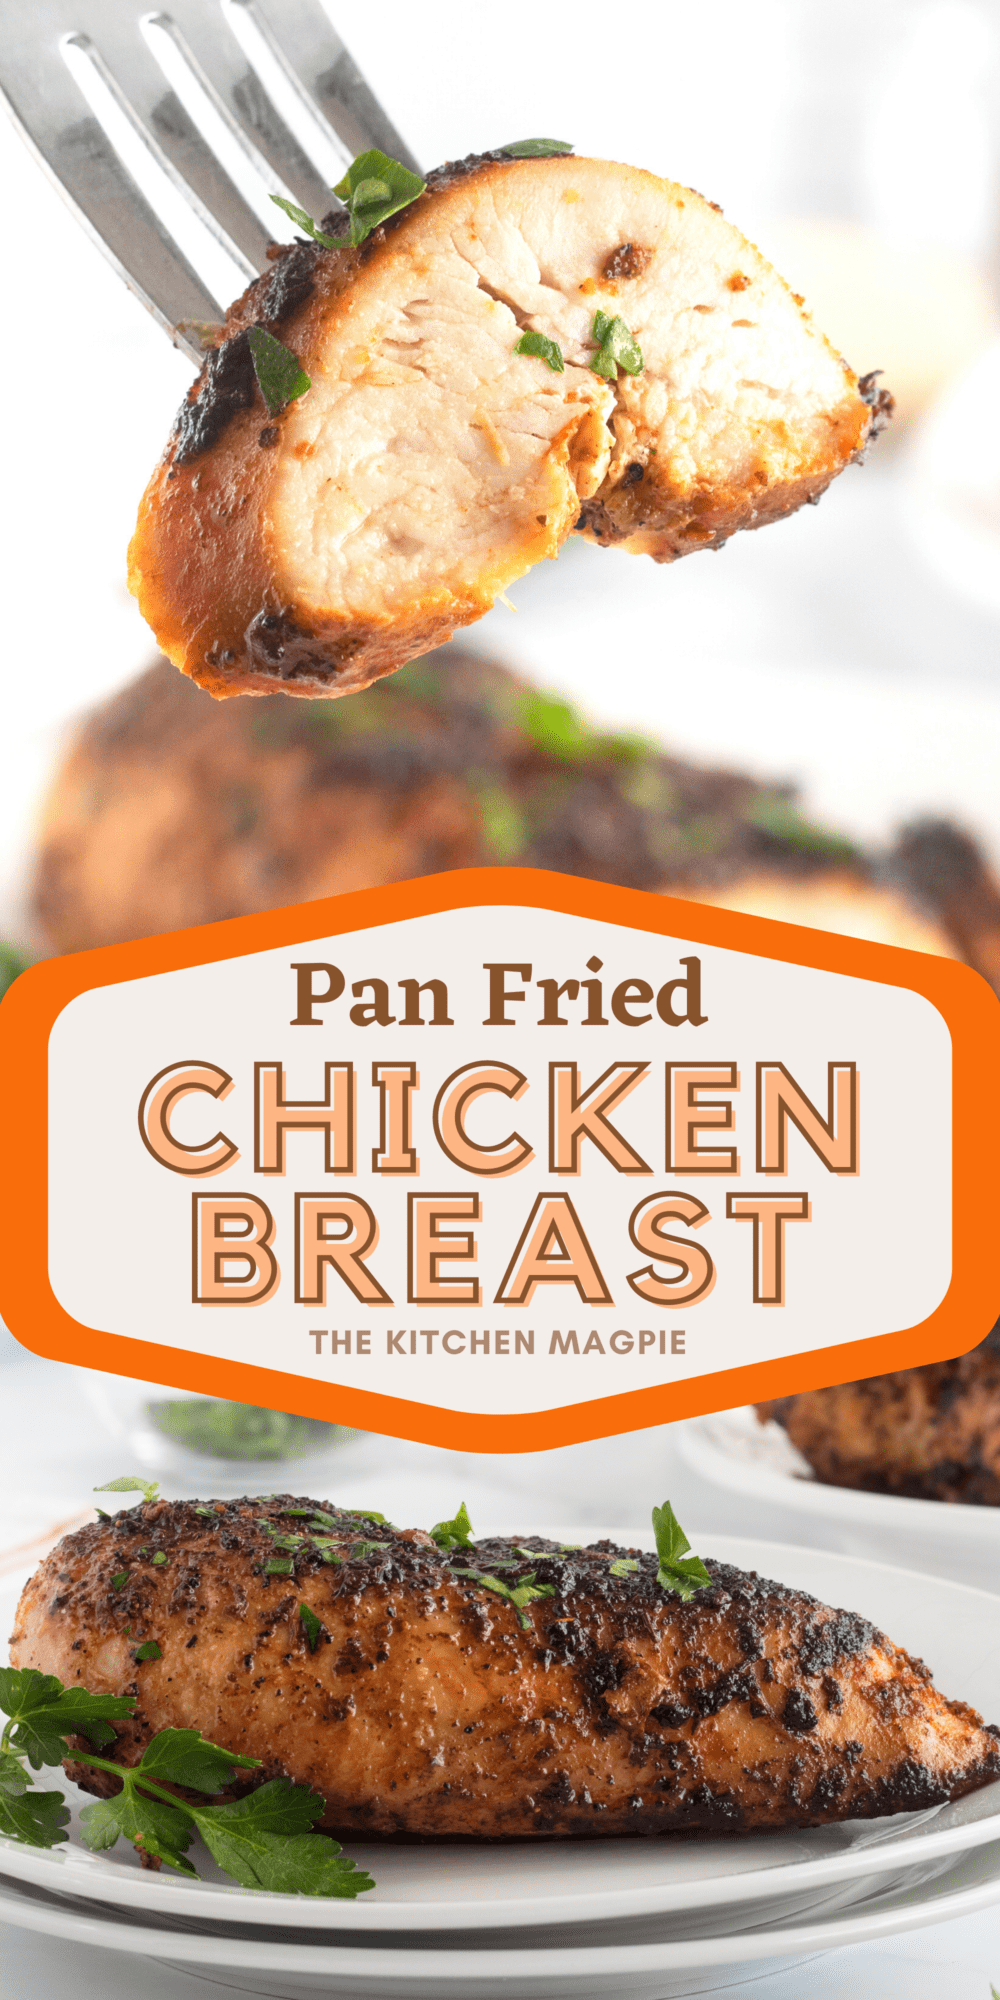 A juicy and lightly crispy chicken breast with seasonings make this a delicious meal or topping on salads or your favorite pasta.